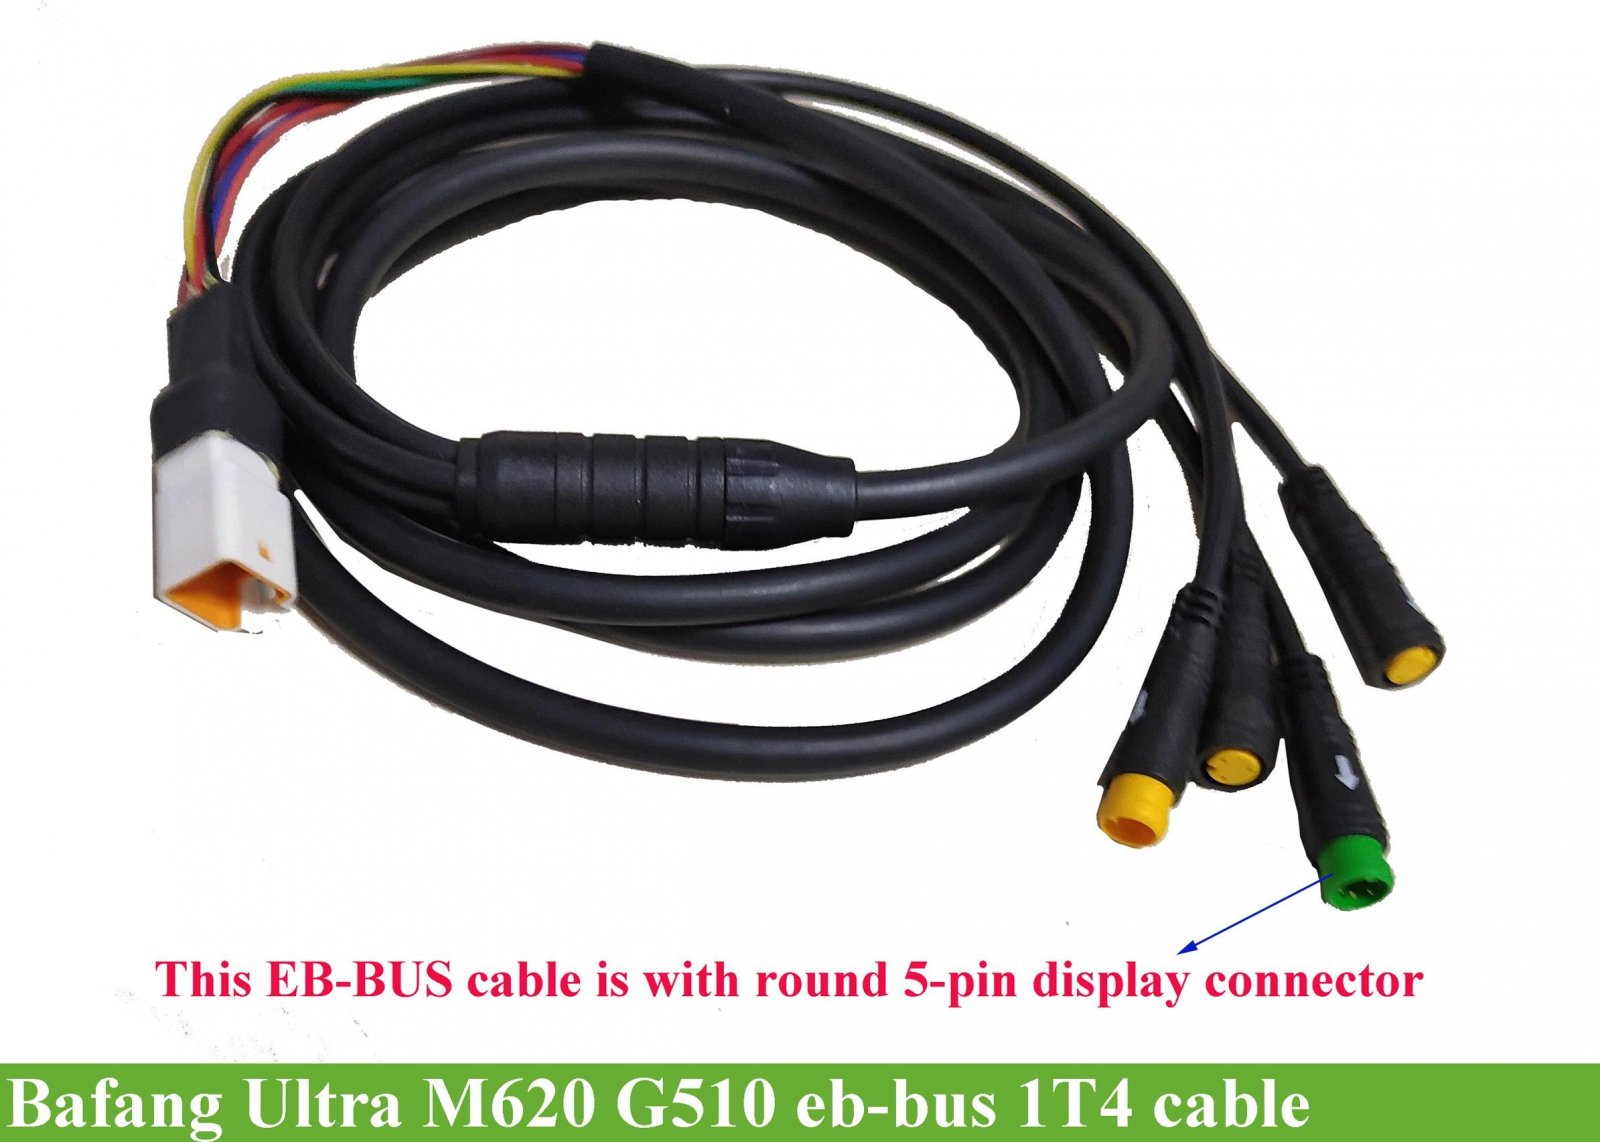 bafang-ultra-m620-g510-eb-bus-cable-with-round-display-connector.jpg